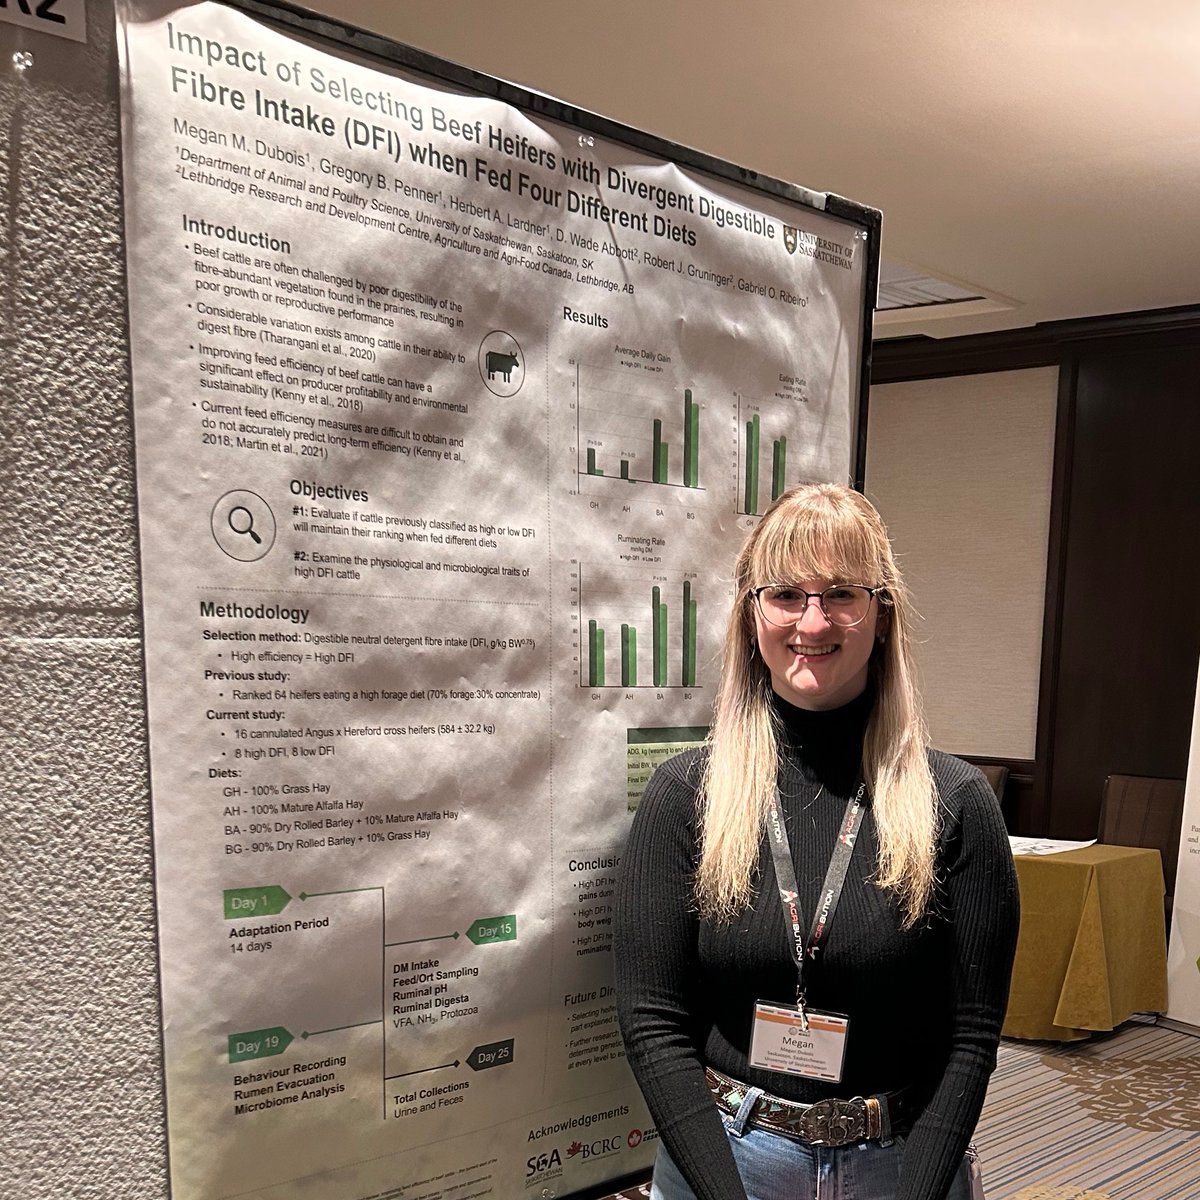 Congrats to #USask grad student Megan Dubois who placed first in the ruminants poster competition at the 2024 Animal Nutrition Conference of Canada! 'Impact of Selecting Beef Heifers with Divergent Digestible Fibre Intake when Fed Four Different Diets'